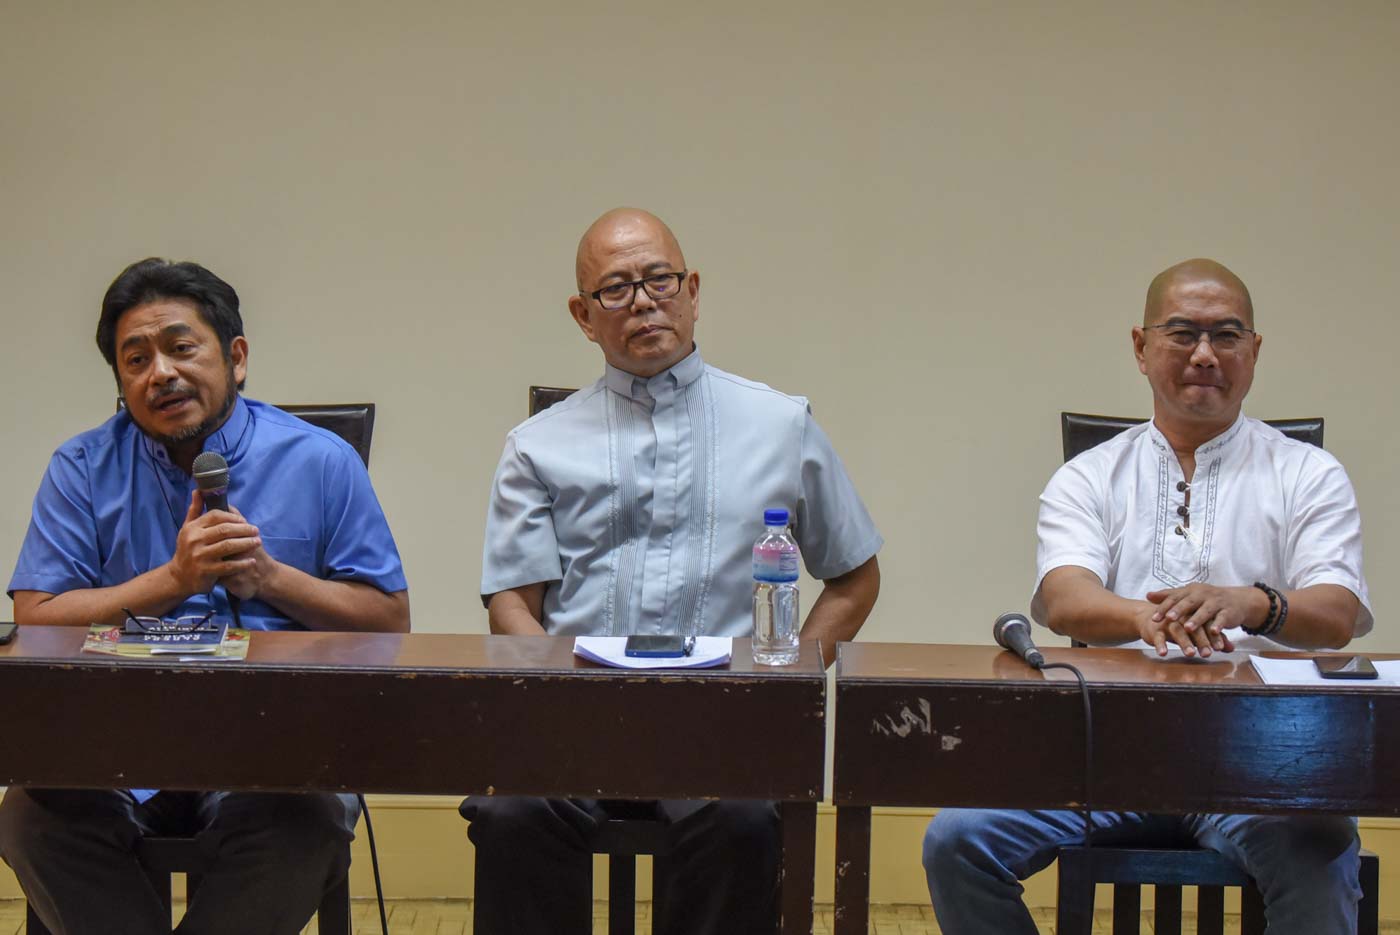 DEATH THREATS. Fathers Albert Alejo, Robert Reyes, and Flavie Villanueva hold a press conference on March 11, 2019, to expose death threats against them under President Rodrigo Duterte's watch. Photo by Maria Tan/Rappler 